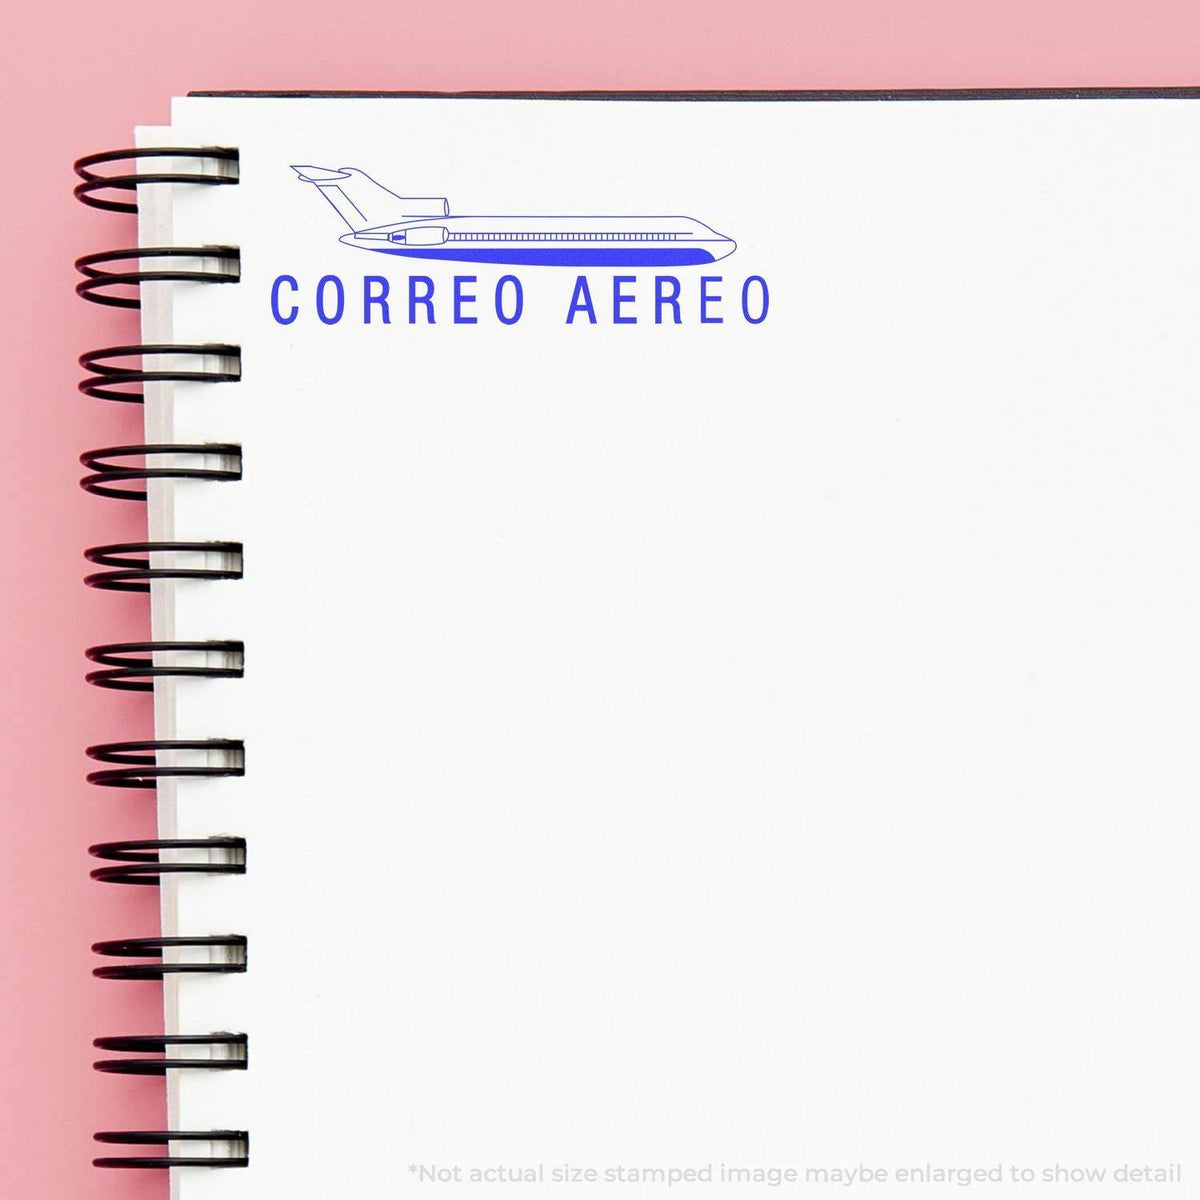 In Use Large Correo Aero Rubber Stamp Image